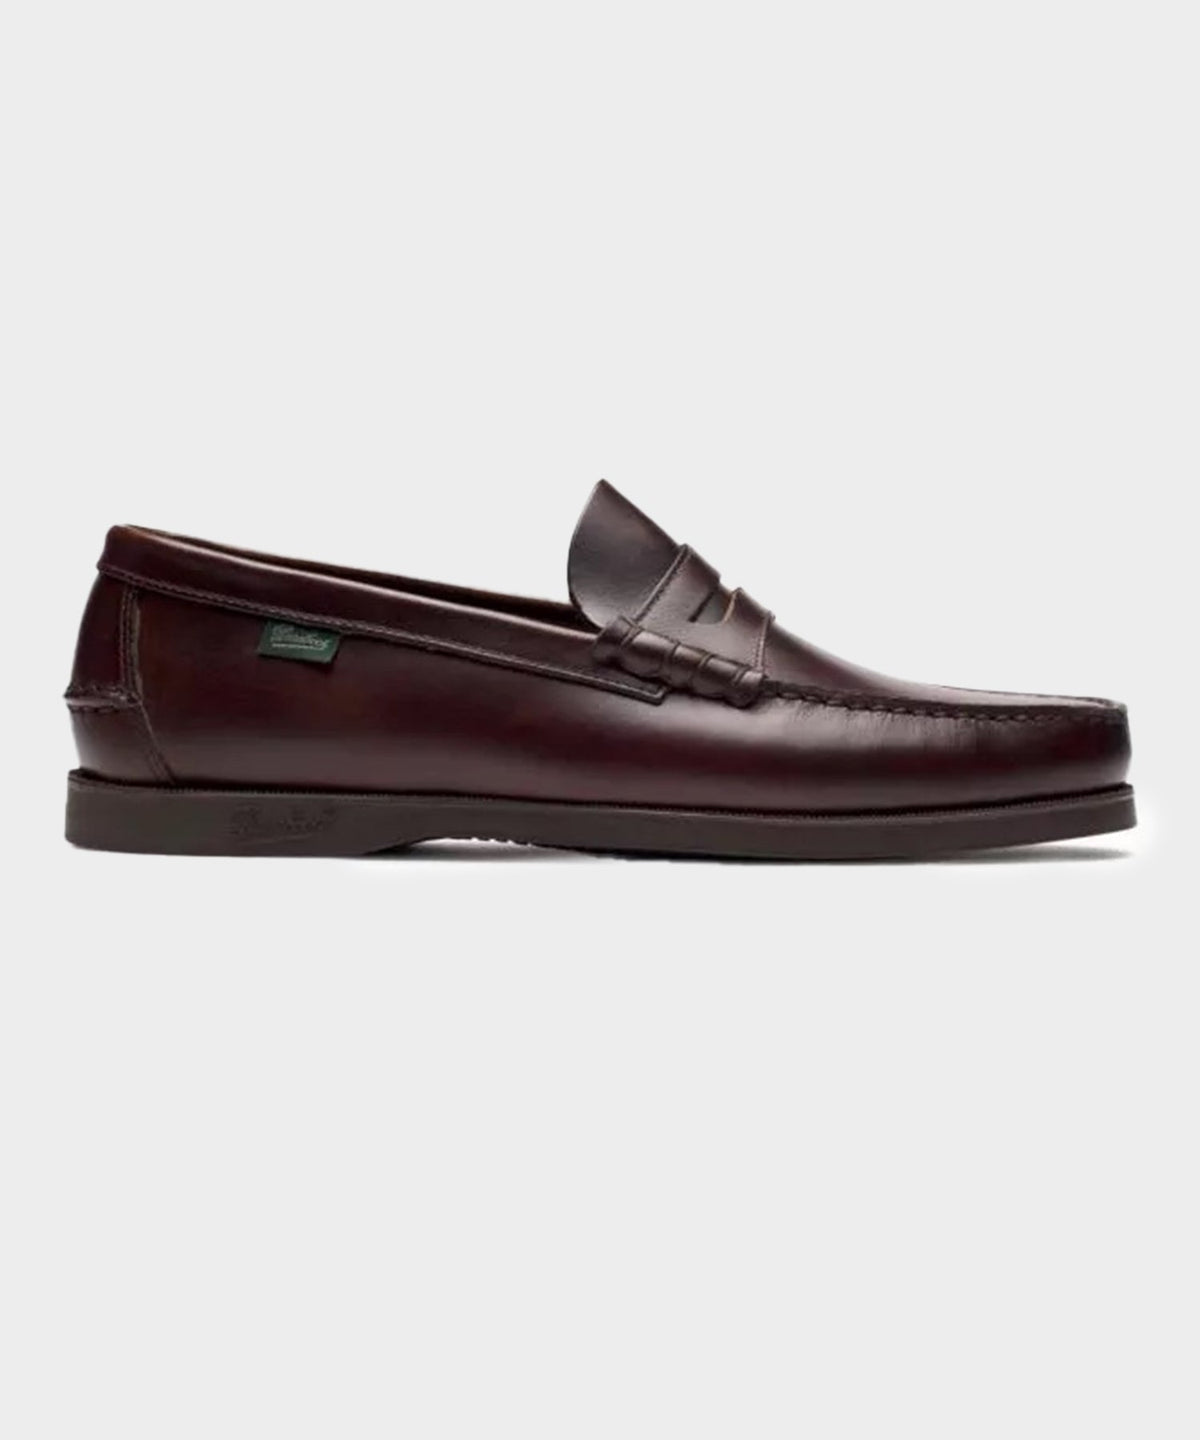 Paraboot Coraux Loafer